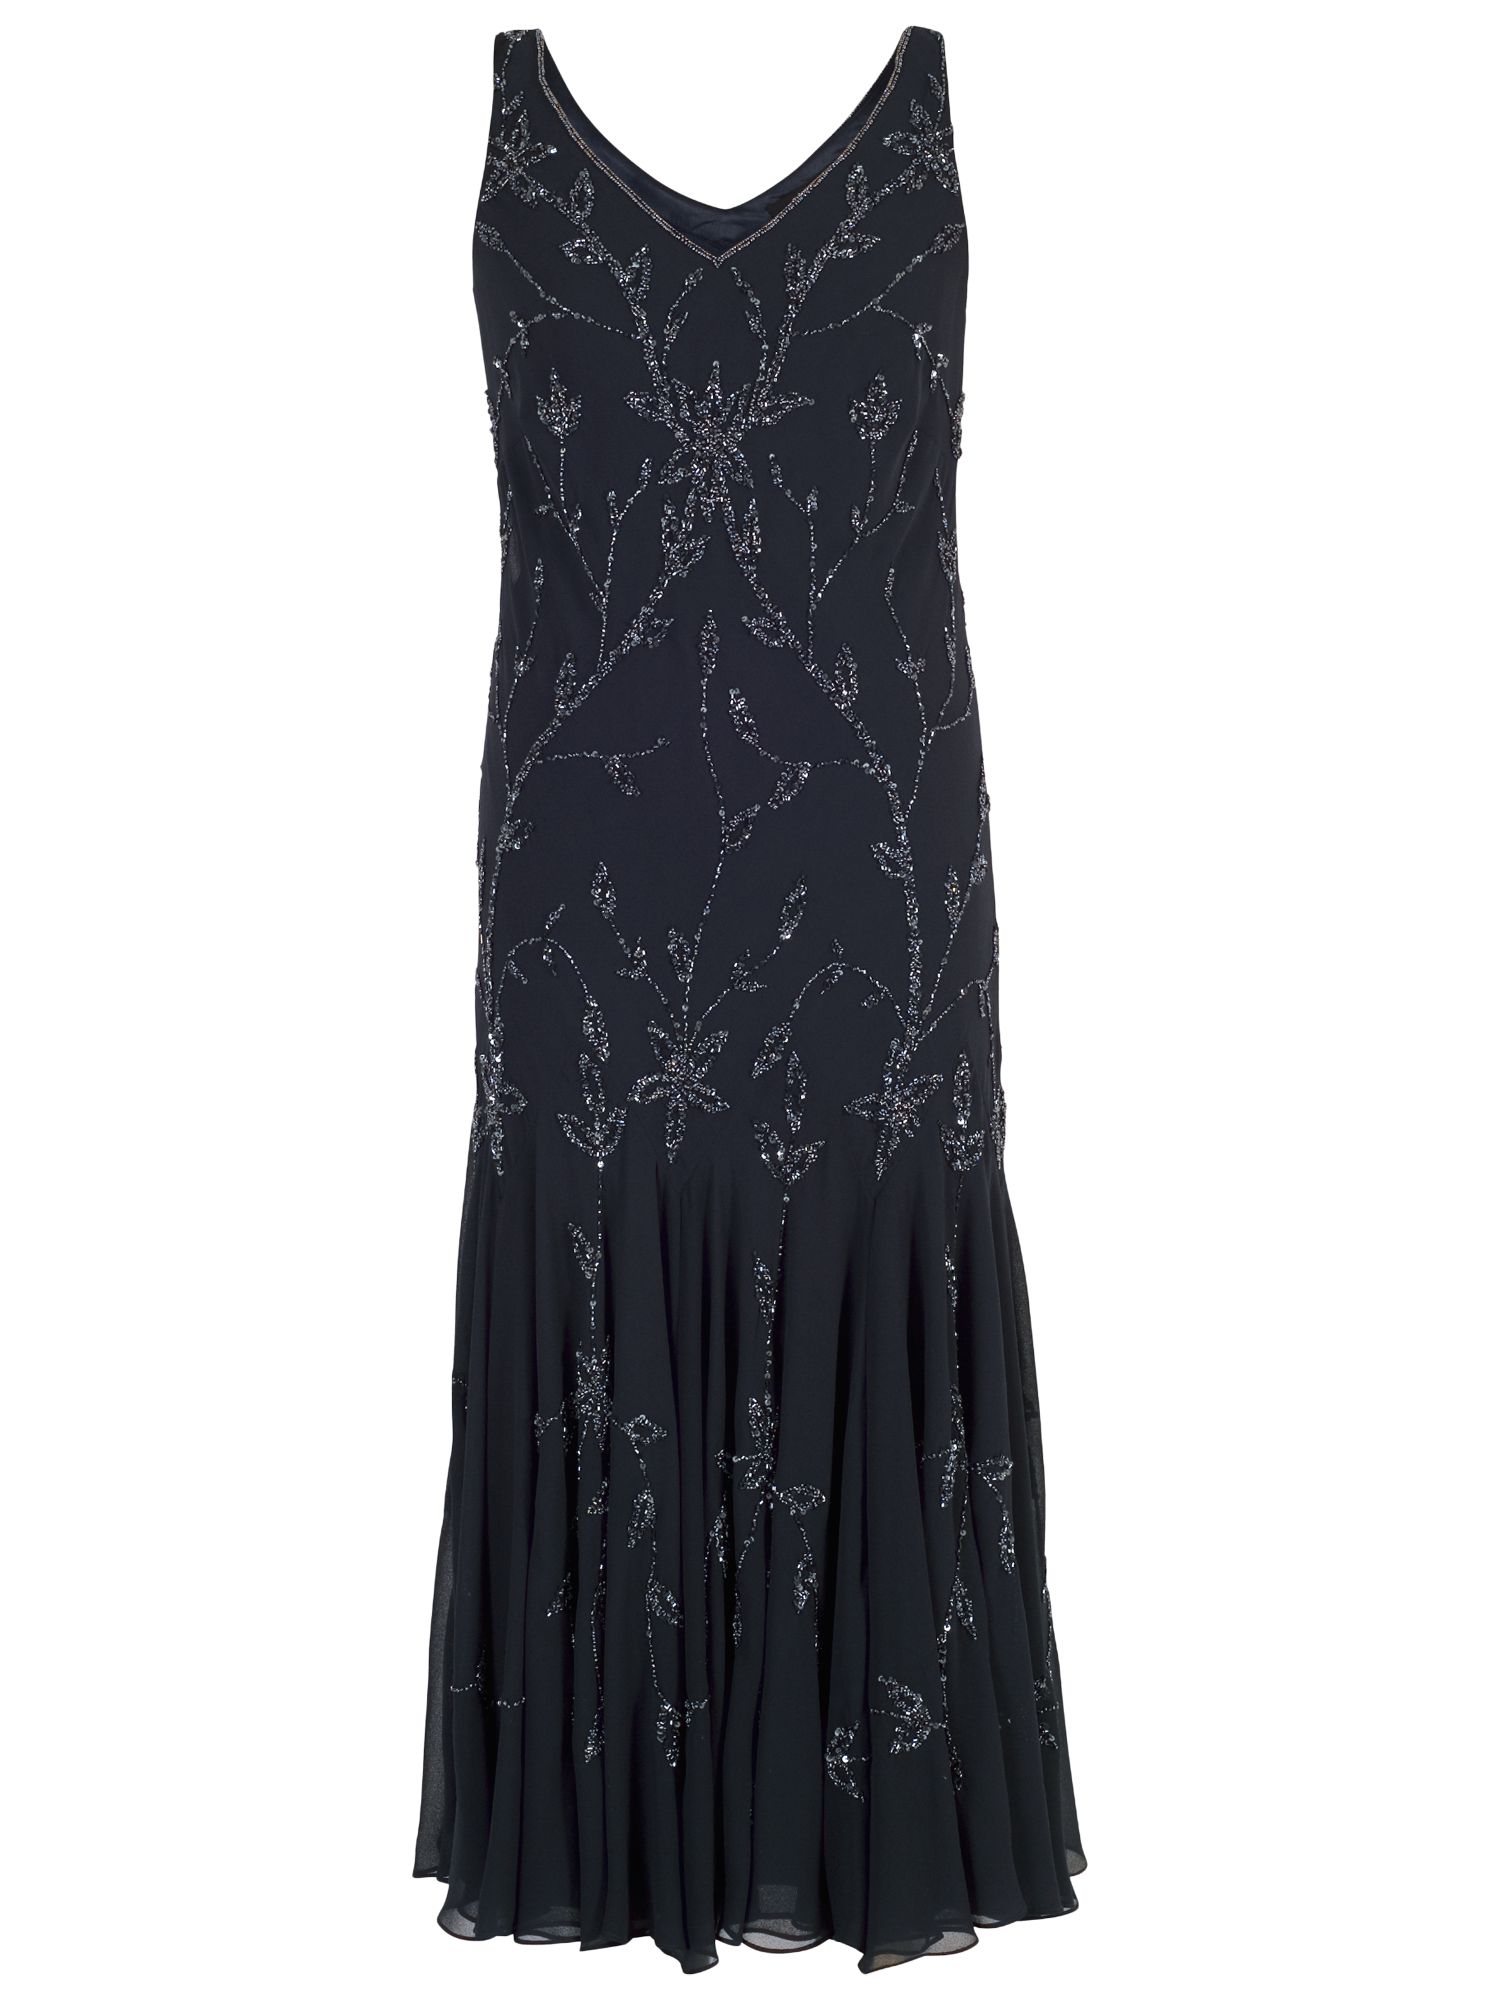 Chesca All Over Beaded Dress at John Lewis & Partners